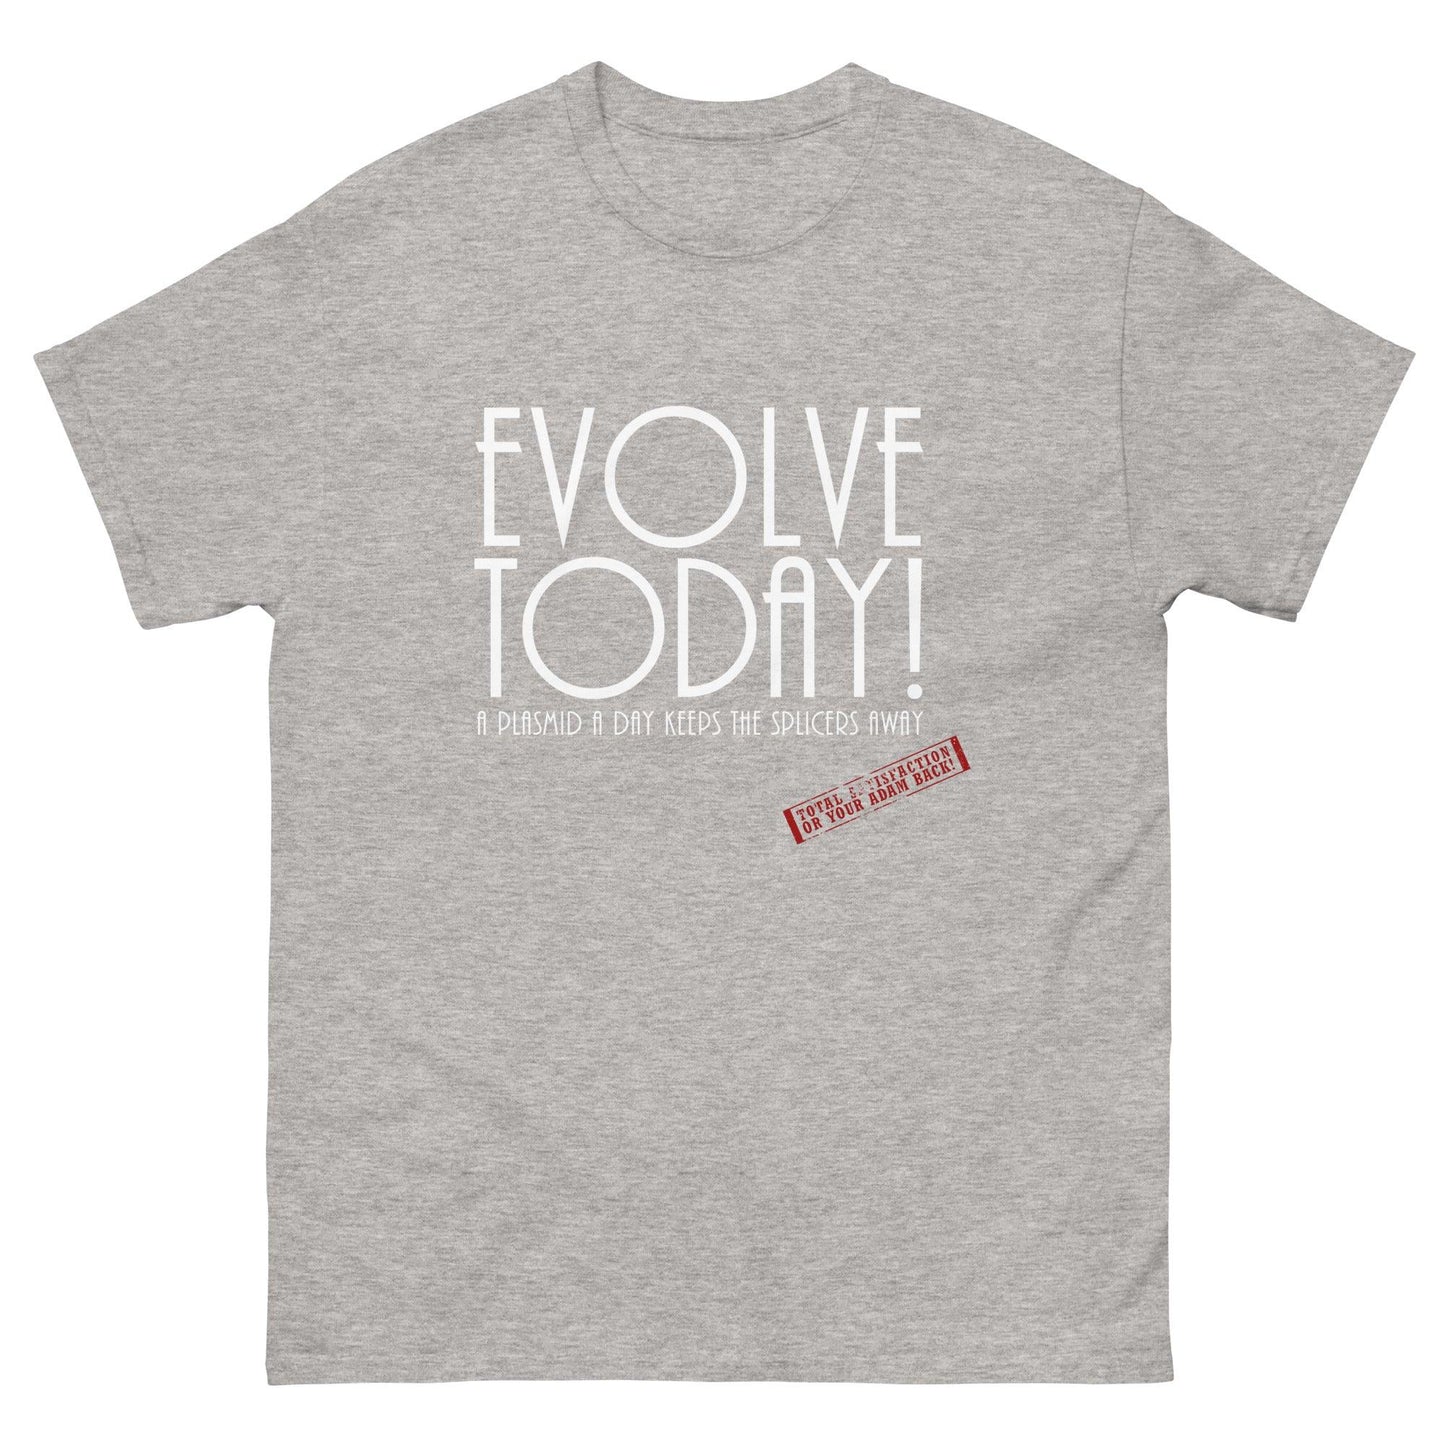 Evolve Today! Tee - Level Up Gamer Wear